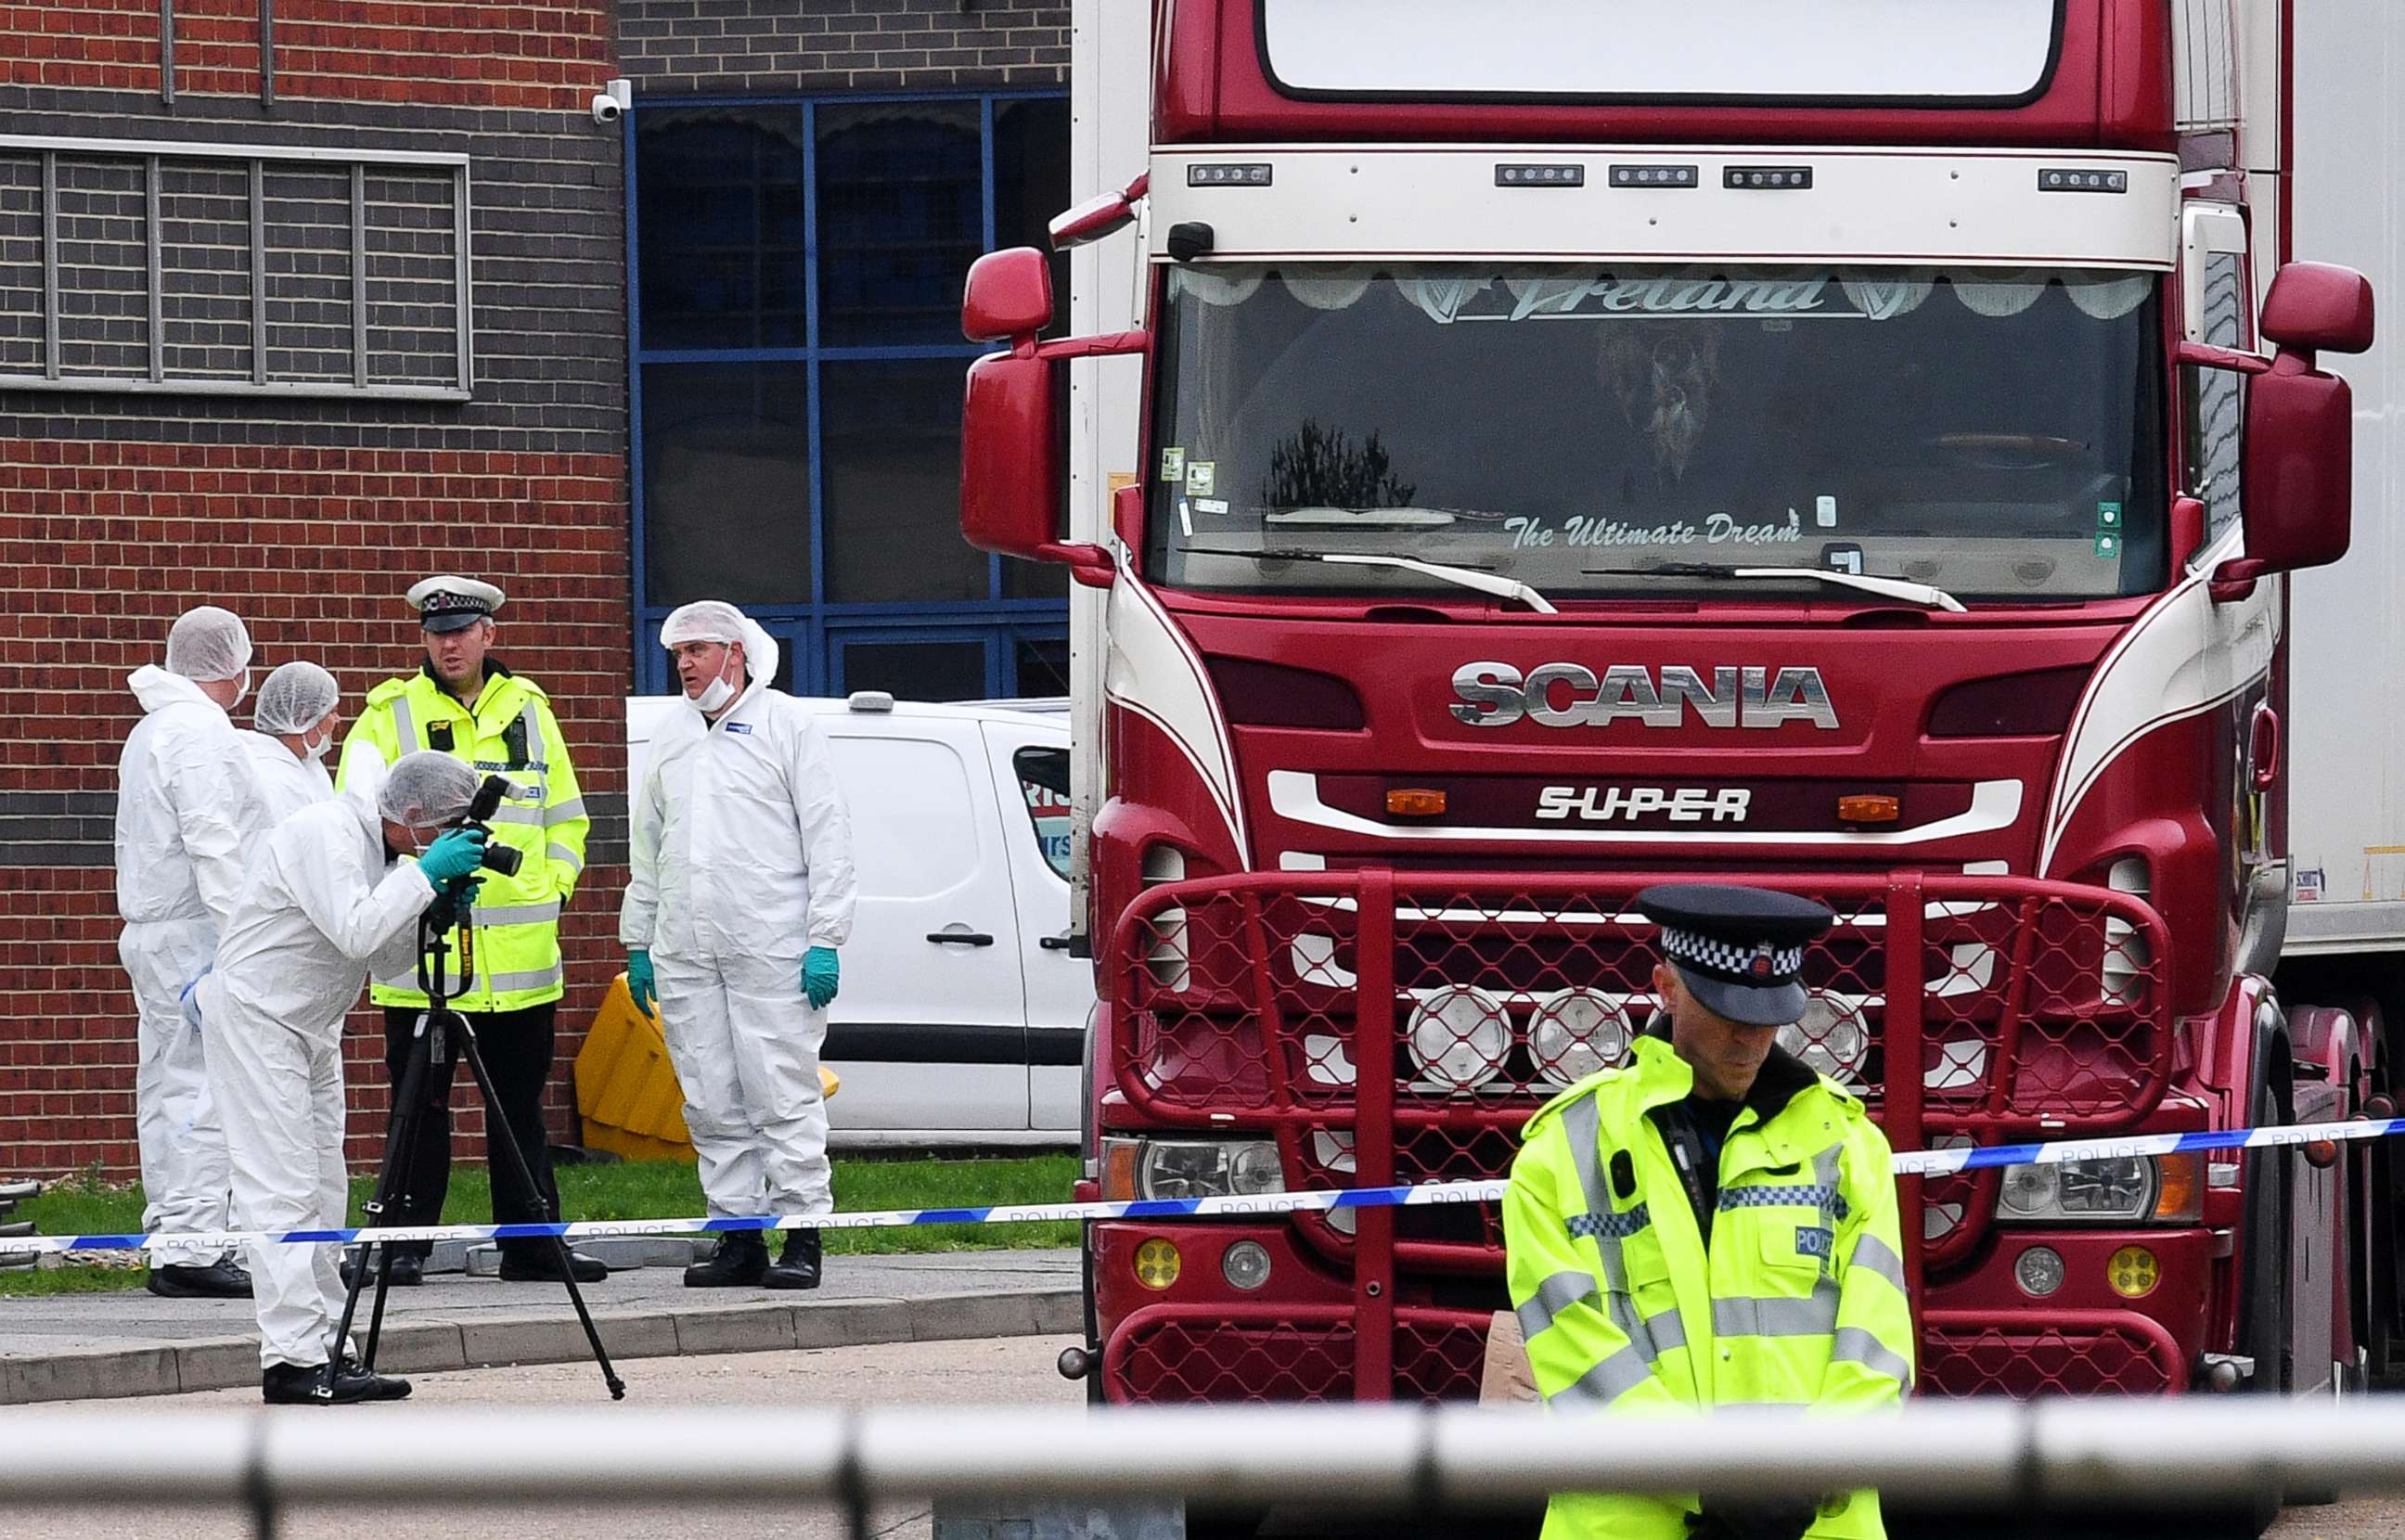 PHOTO: Police and forensic officers investigate a lorry in which 39 bodies were discovered in the trailer, as they prepare move the vehicle from the site on Oct. 23, 2019, in Thurrock, England.